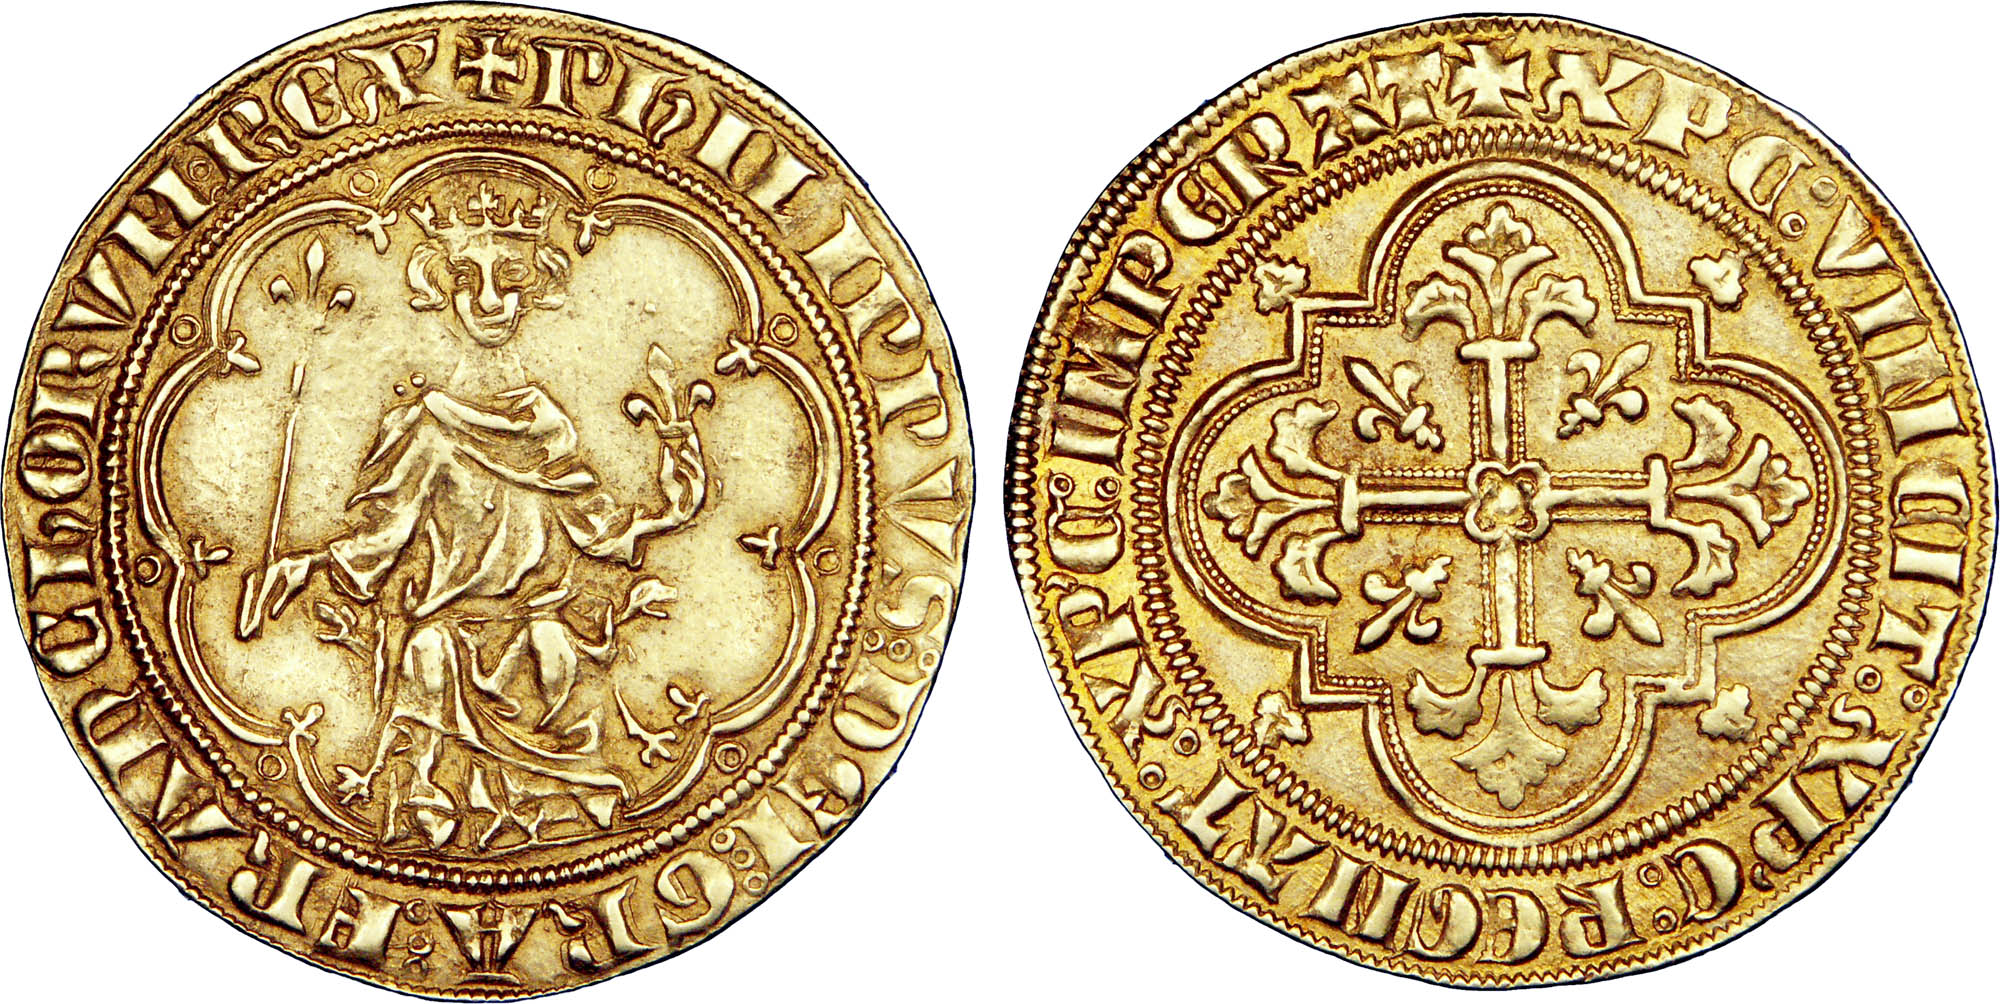 Gold coin of the reign of Philip the Fair.